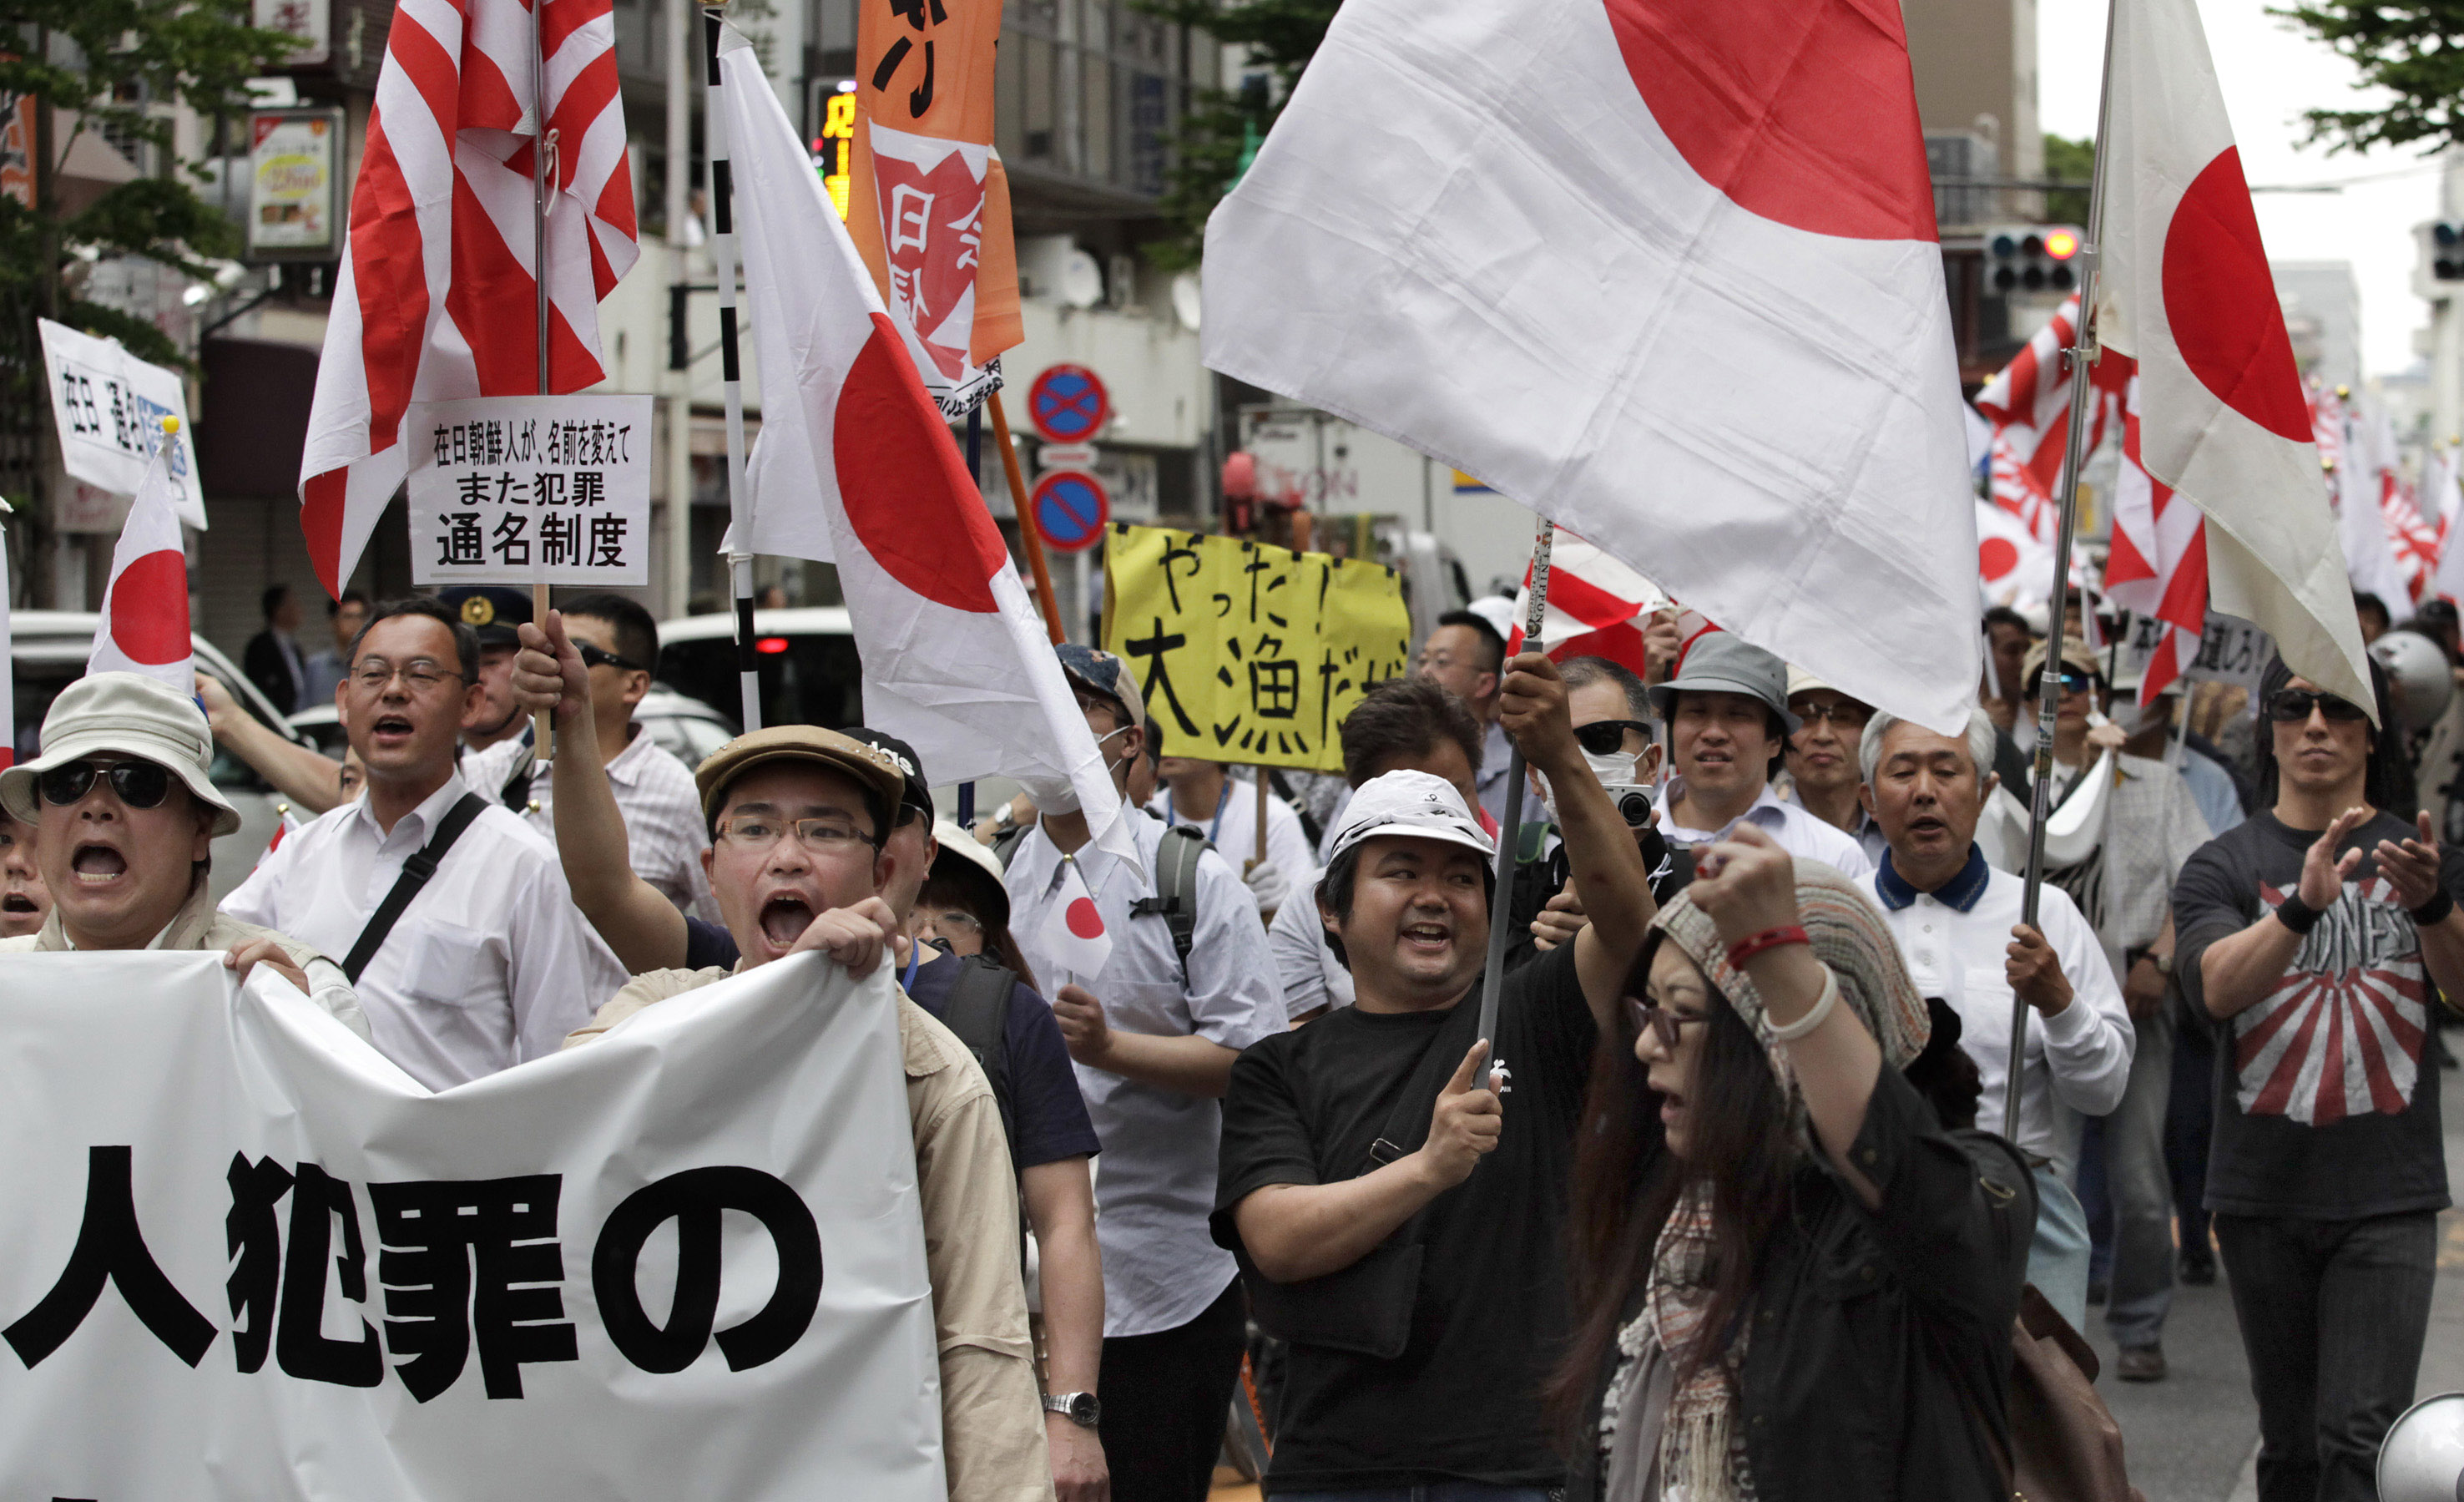 Worrisome words: In this photo taken May 19, 2013, nationalist protesters with flags march through Tokyo to denounce 'privileges' for Korean residents in Japan. Some of the demonstrators were heard shouting, 'Kill Koreans.' | AP